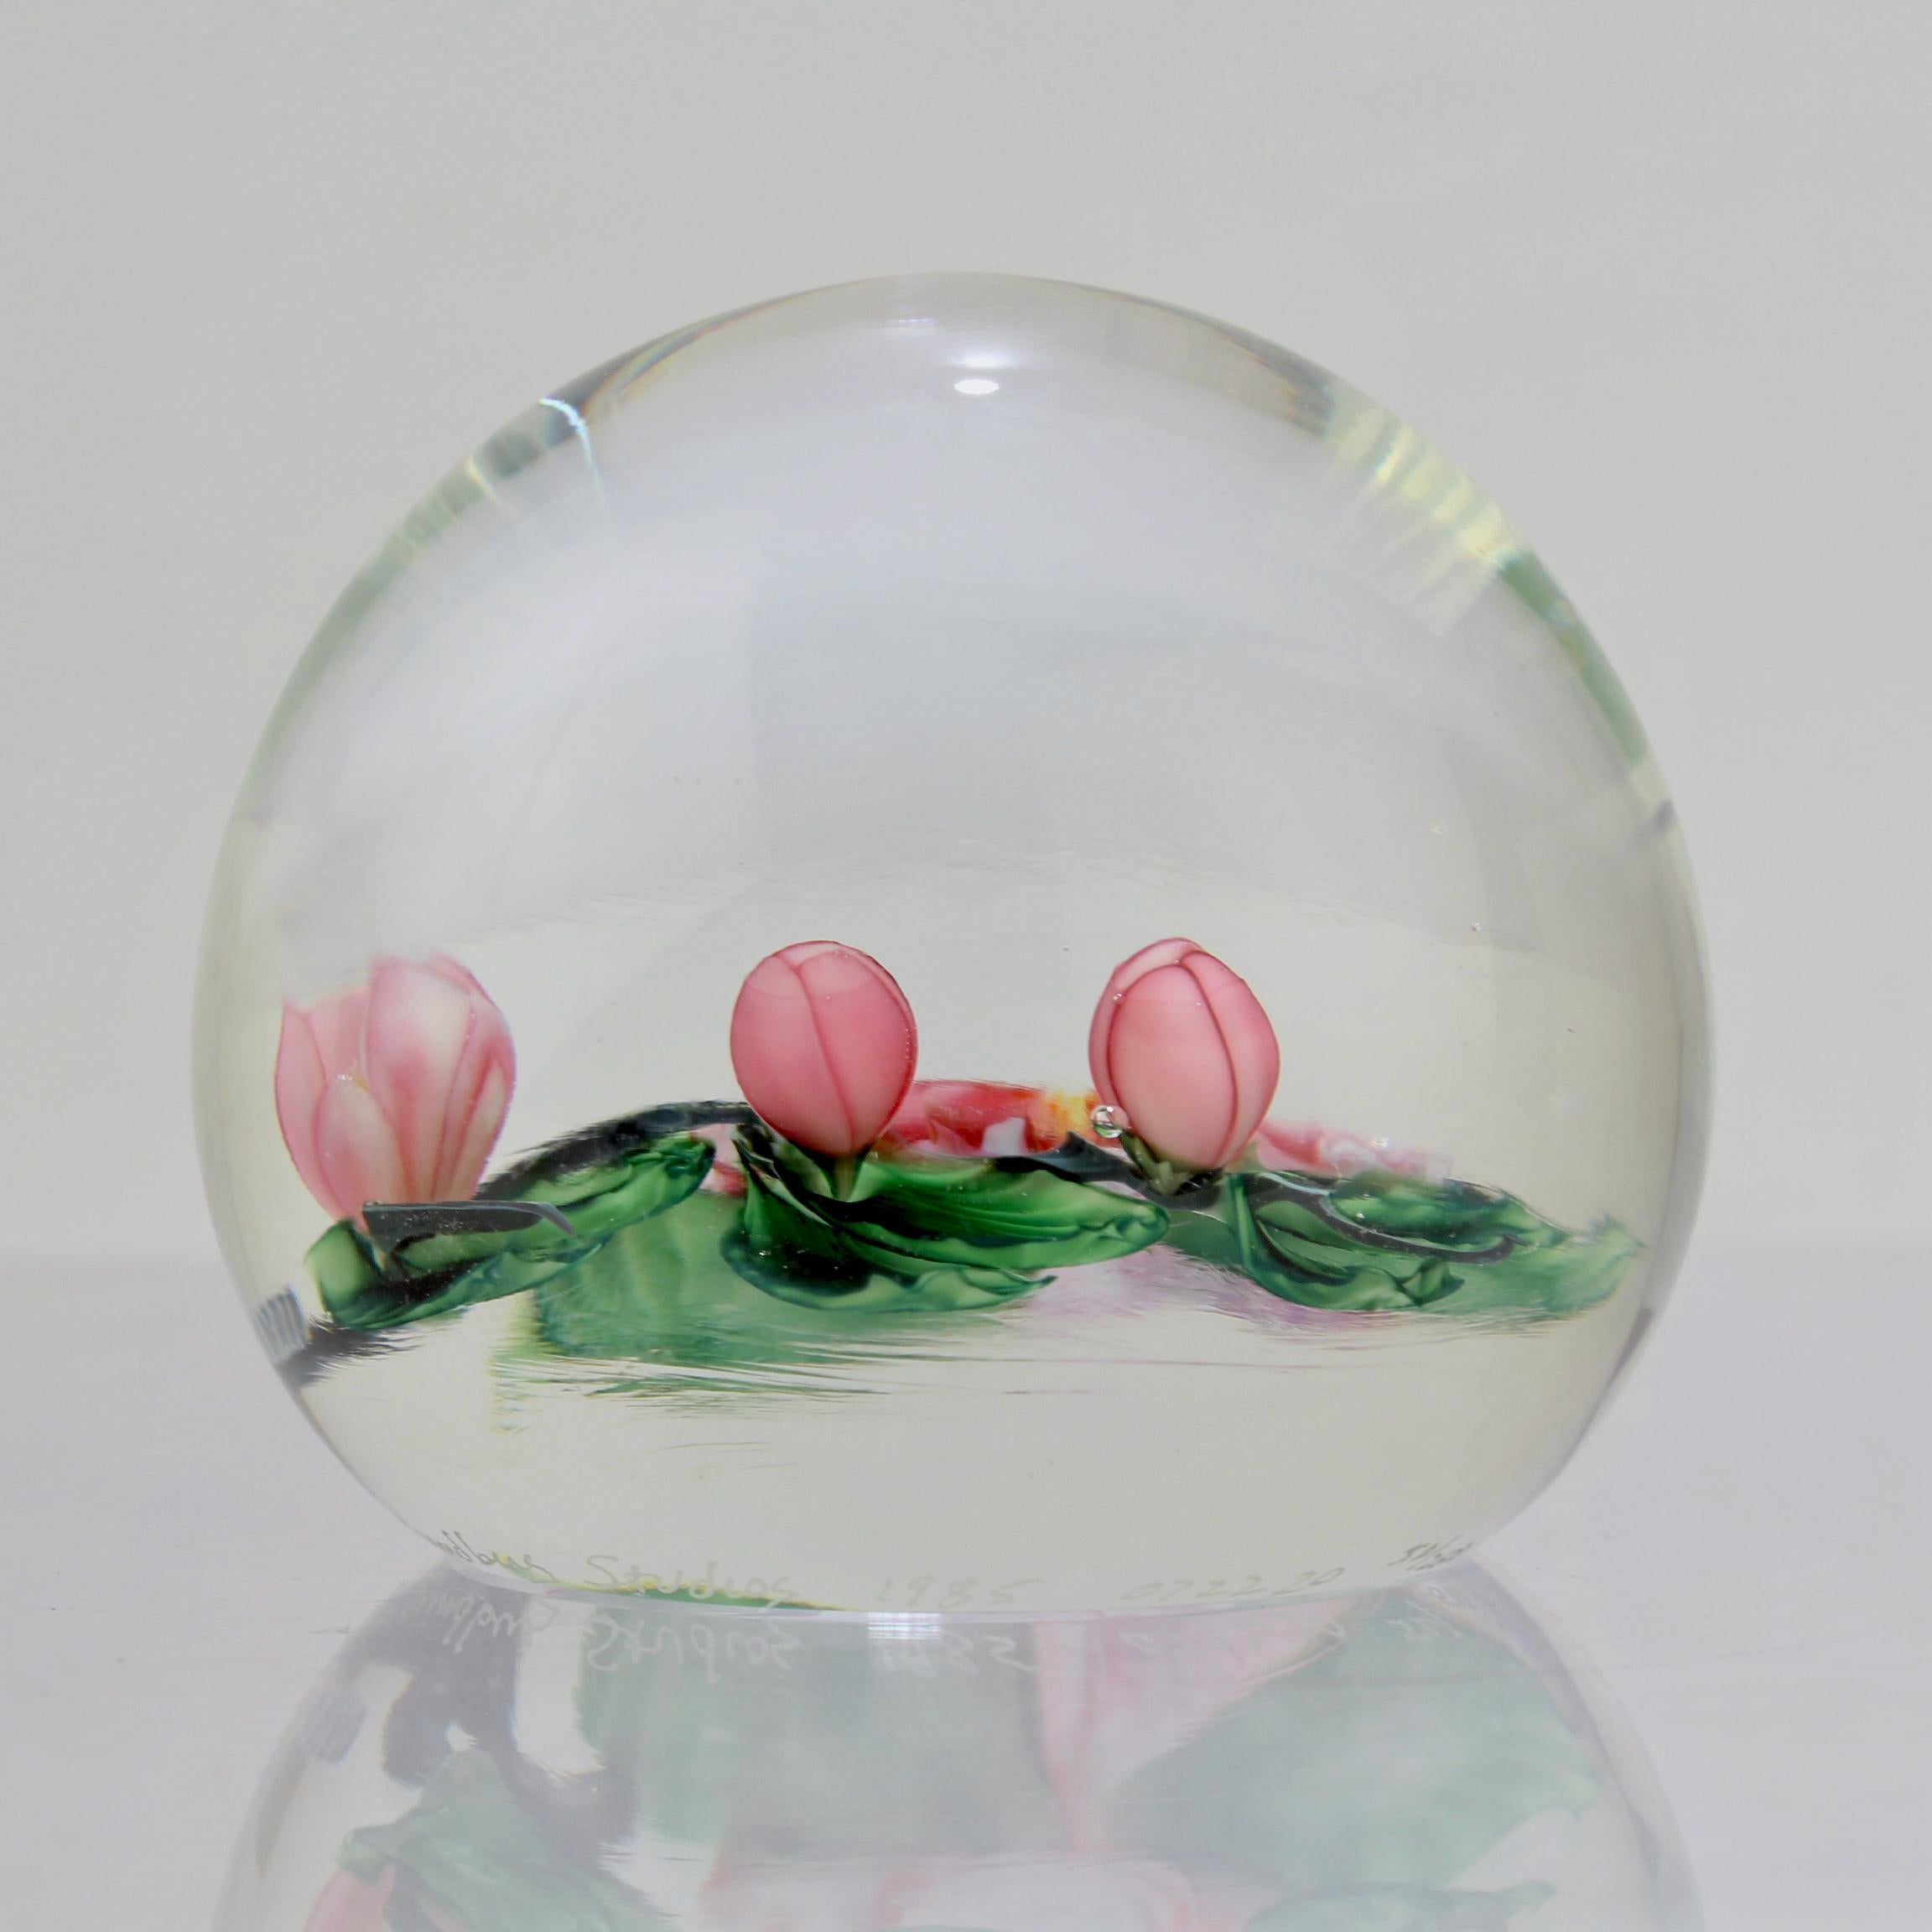 paperweight artists' signatures